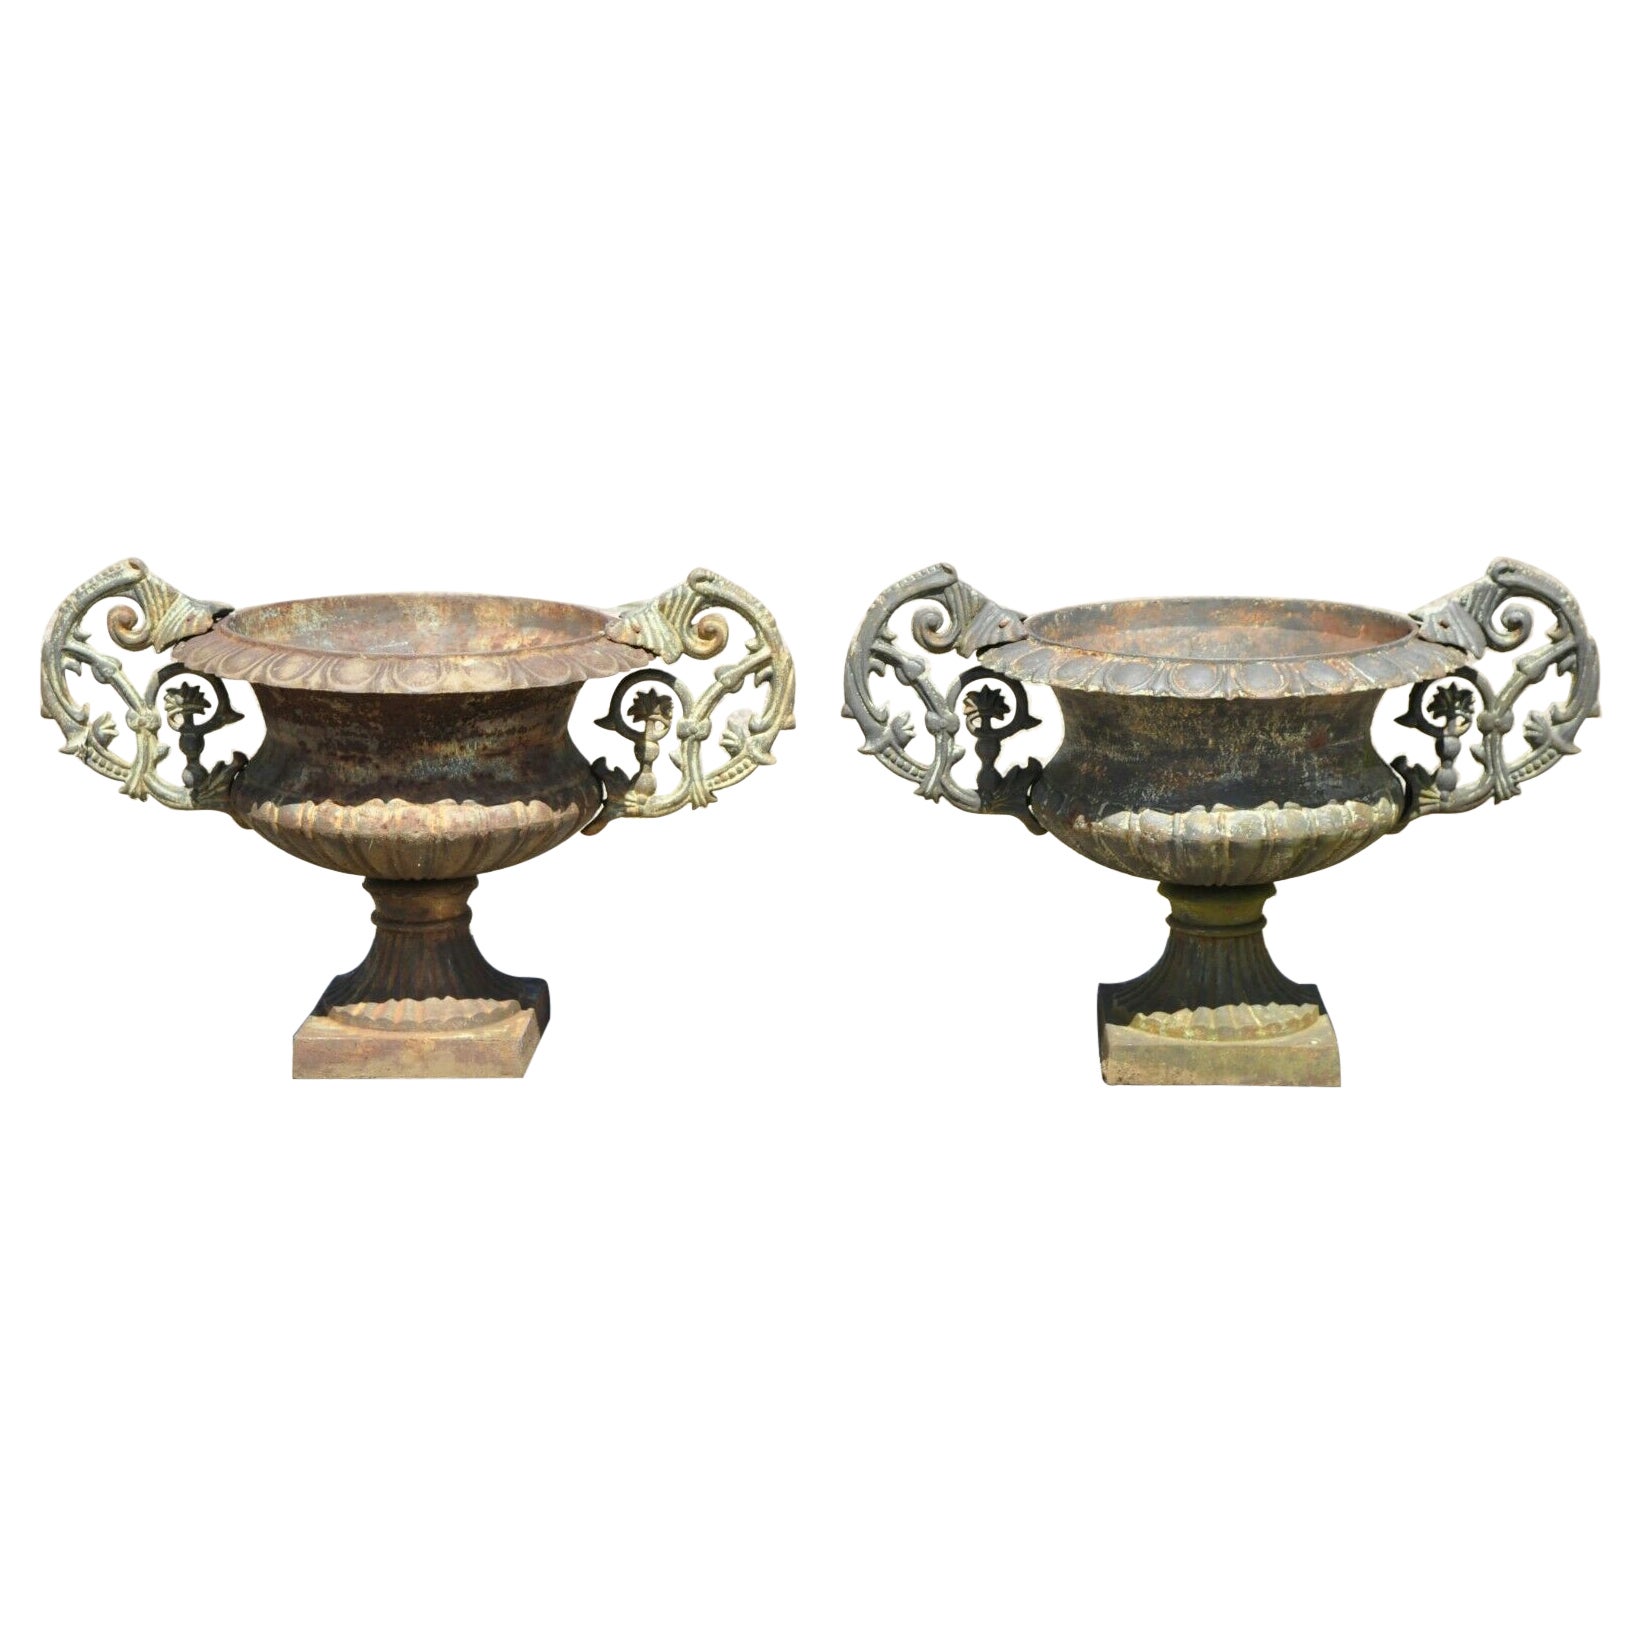 Cast Iron Victorian Style Vrn Form Garden Planters with Handles - a pair